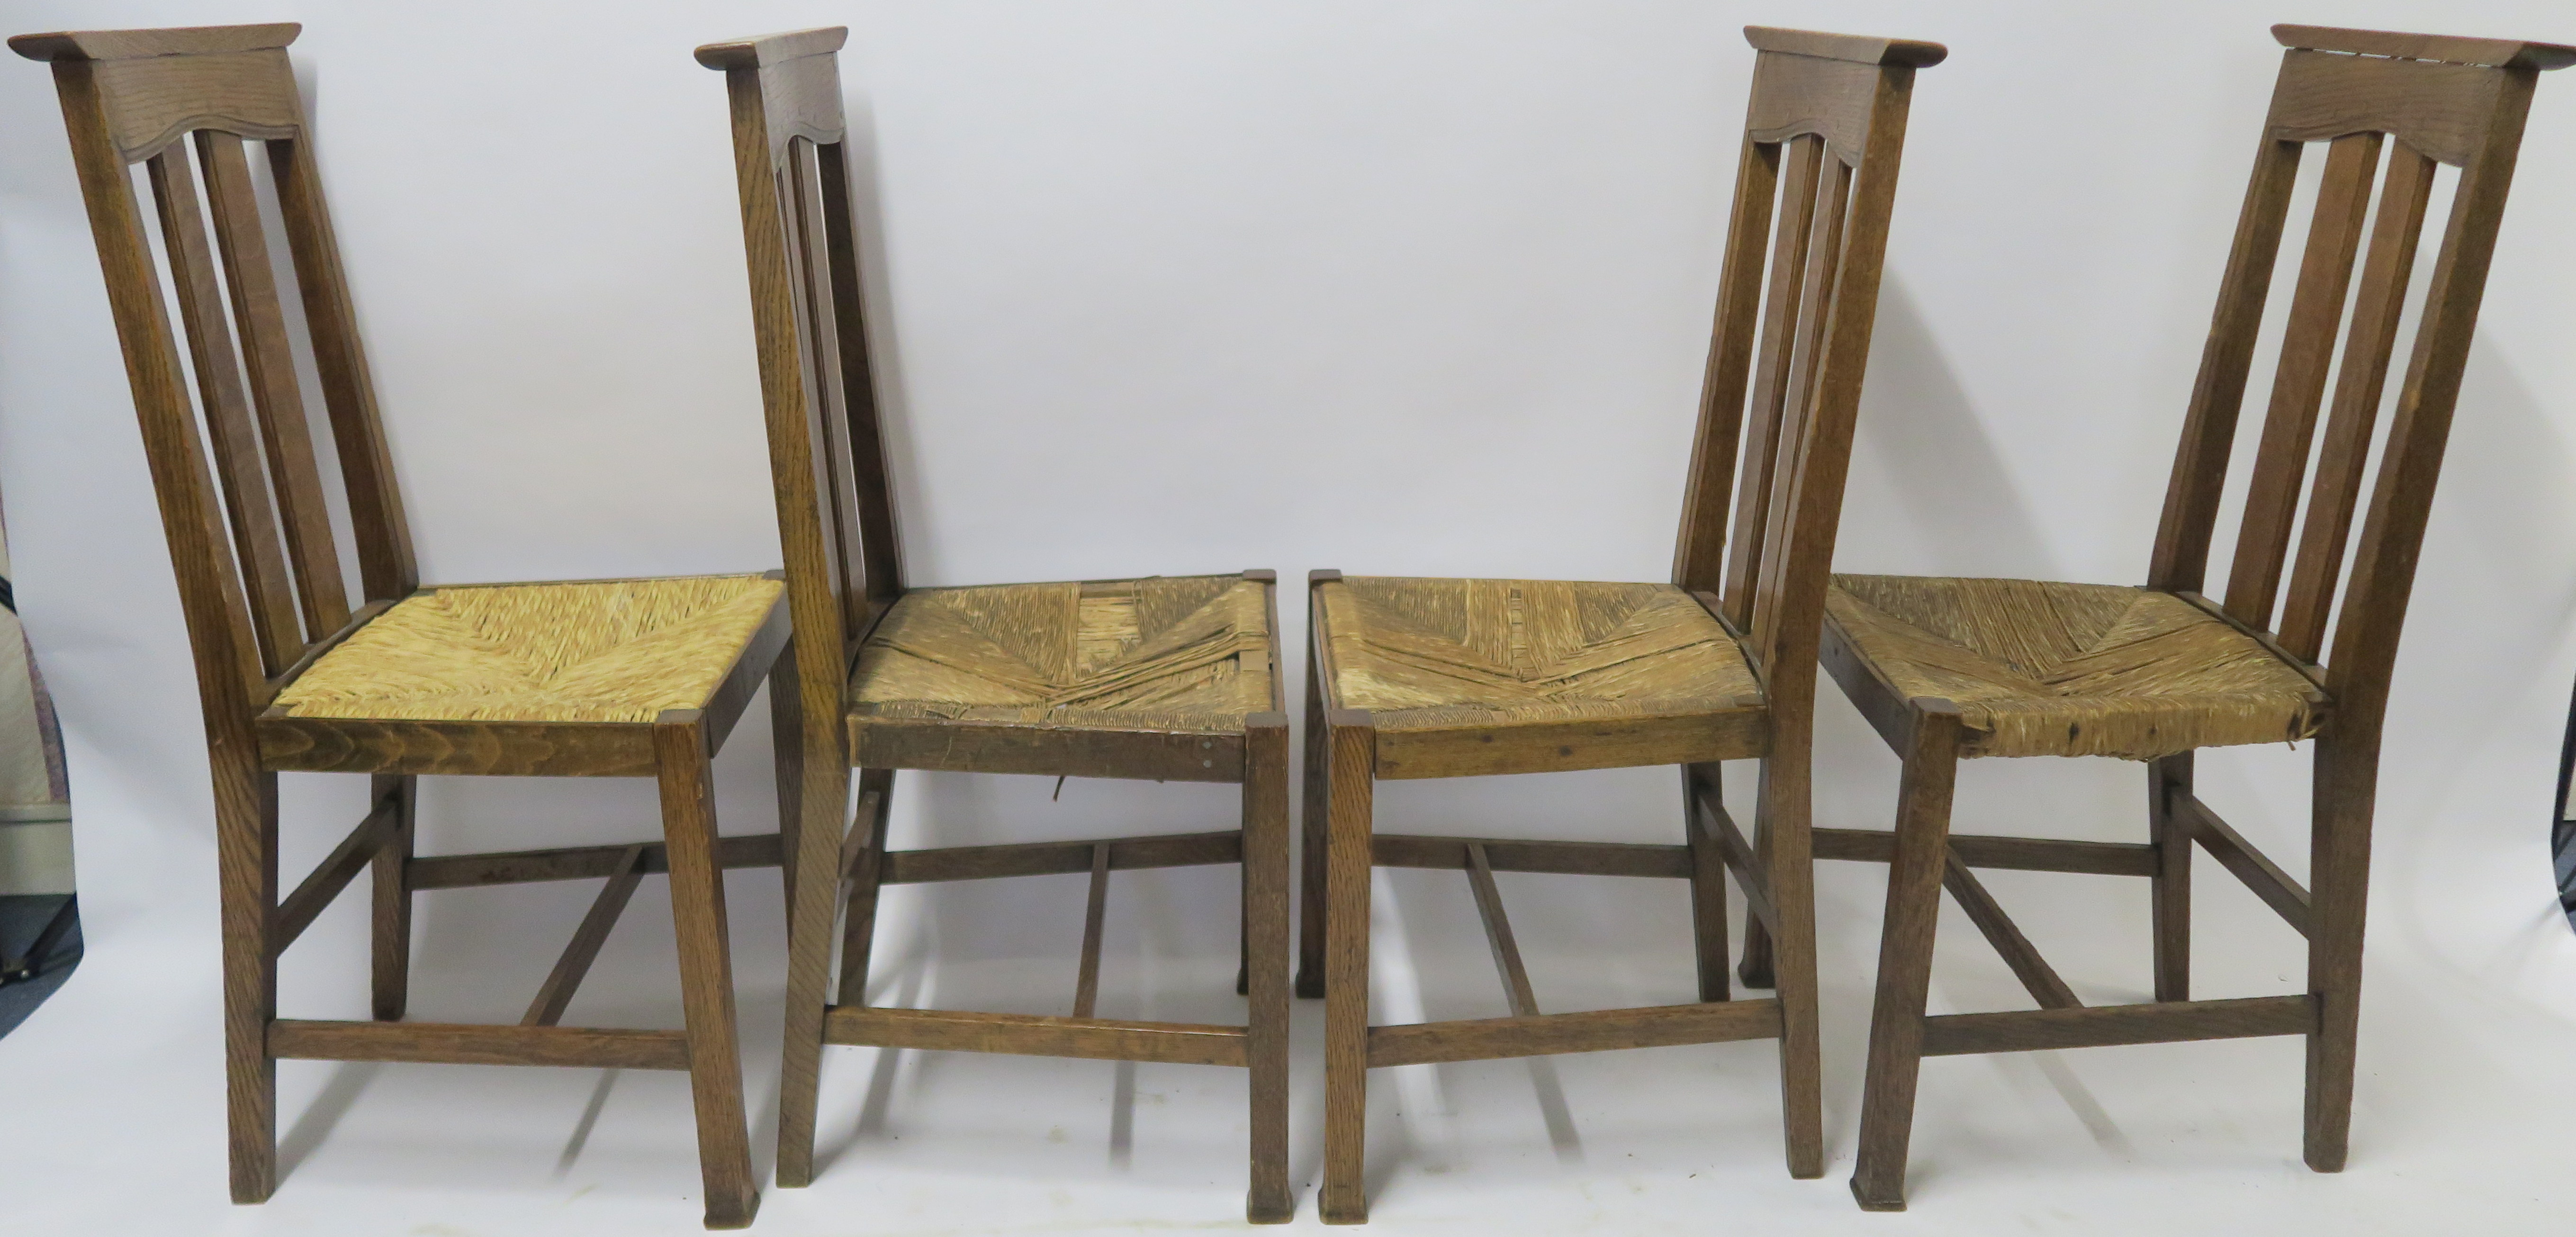 A SET OF SIX ARTS AND CRAFTS DINING CHAIRS WITH RUSH SEATS 103cm and 100cm high and two other chairs - Image 10 of 22